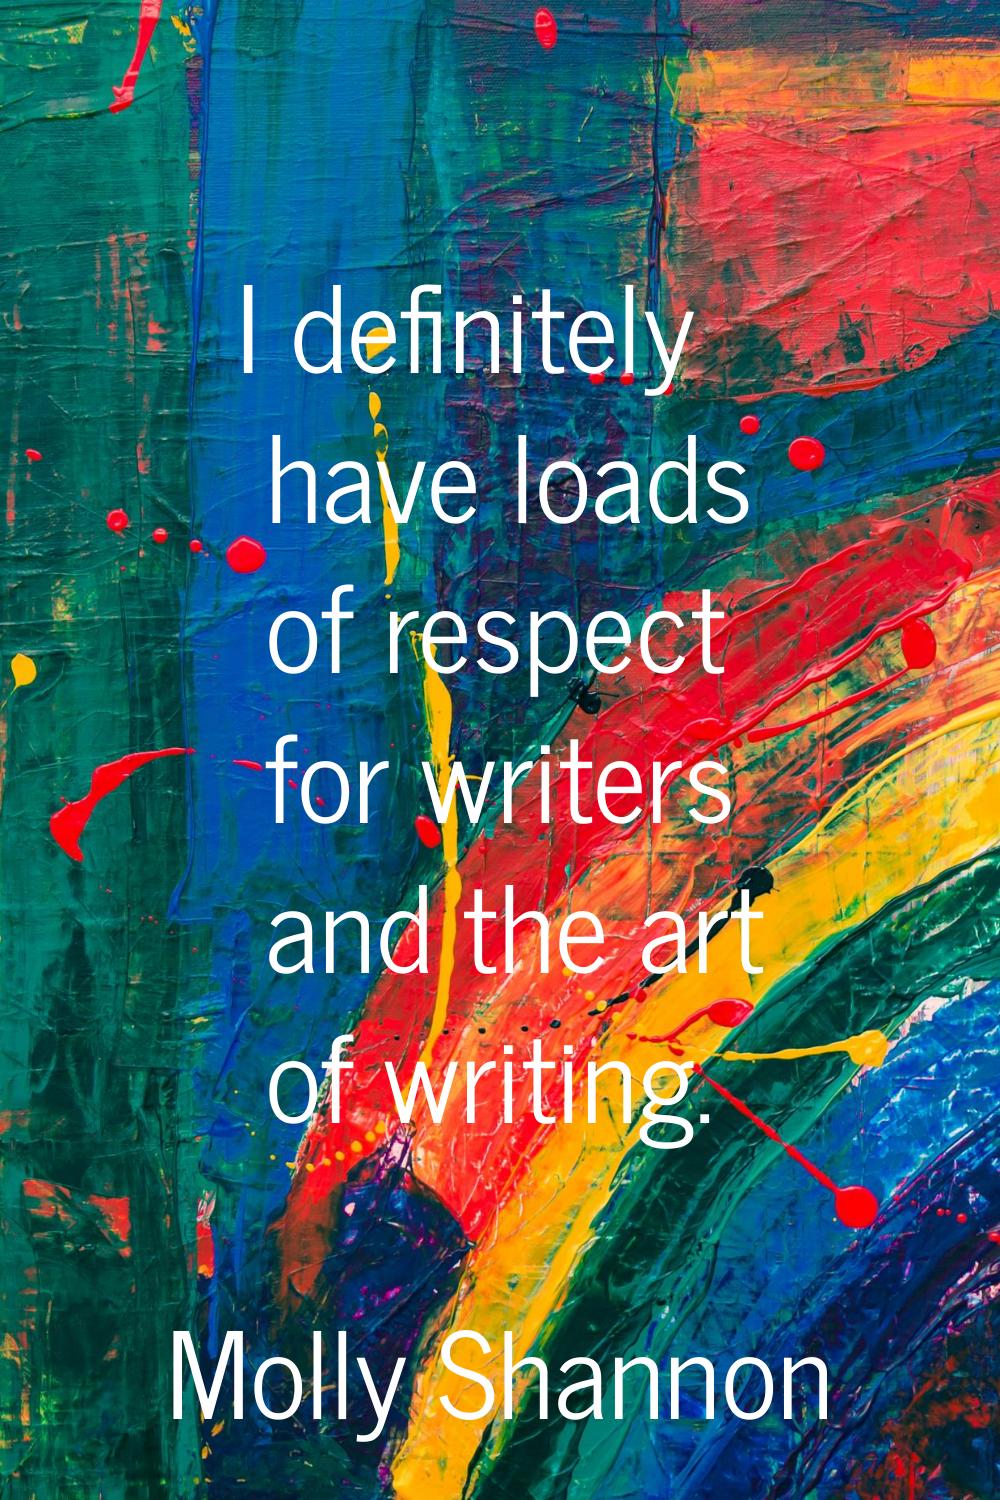 I definitely have loads of respect for writers and the art of writing.